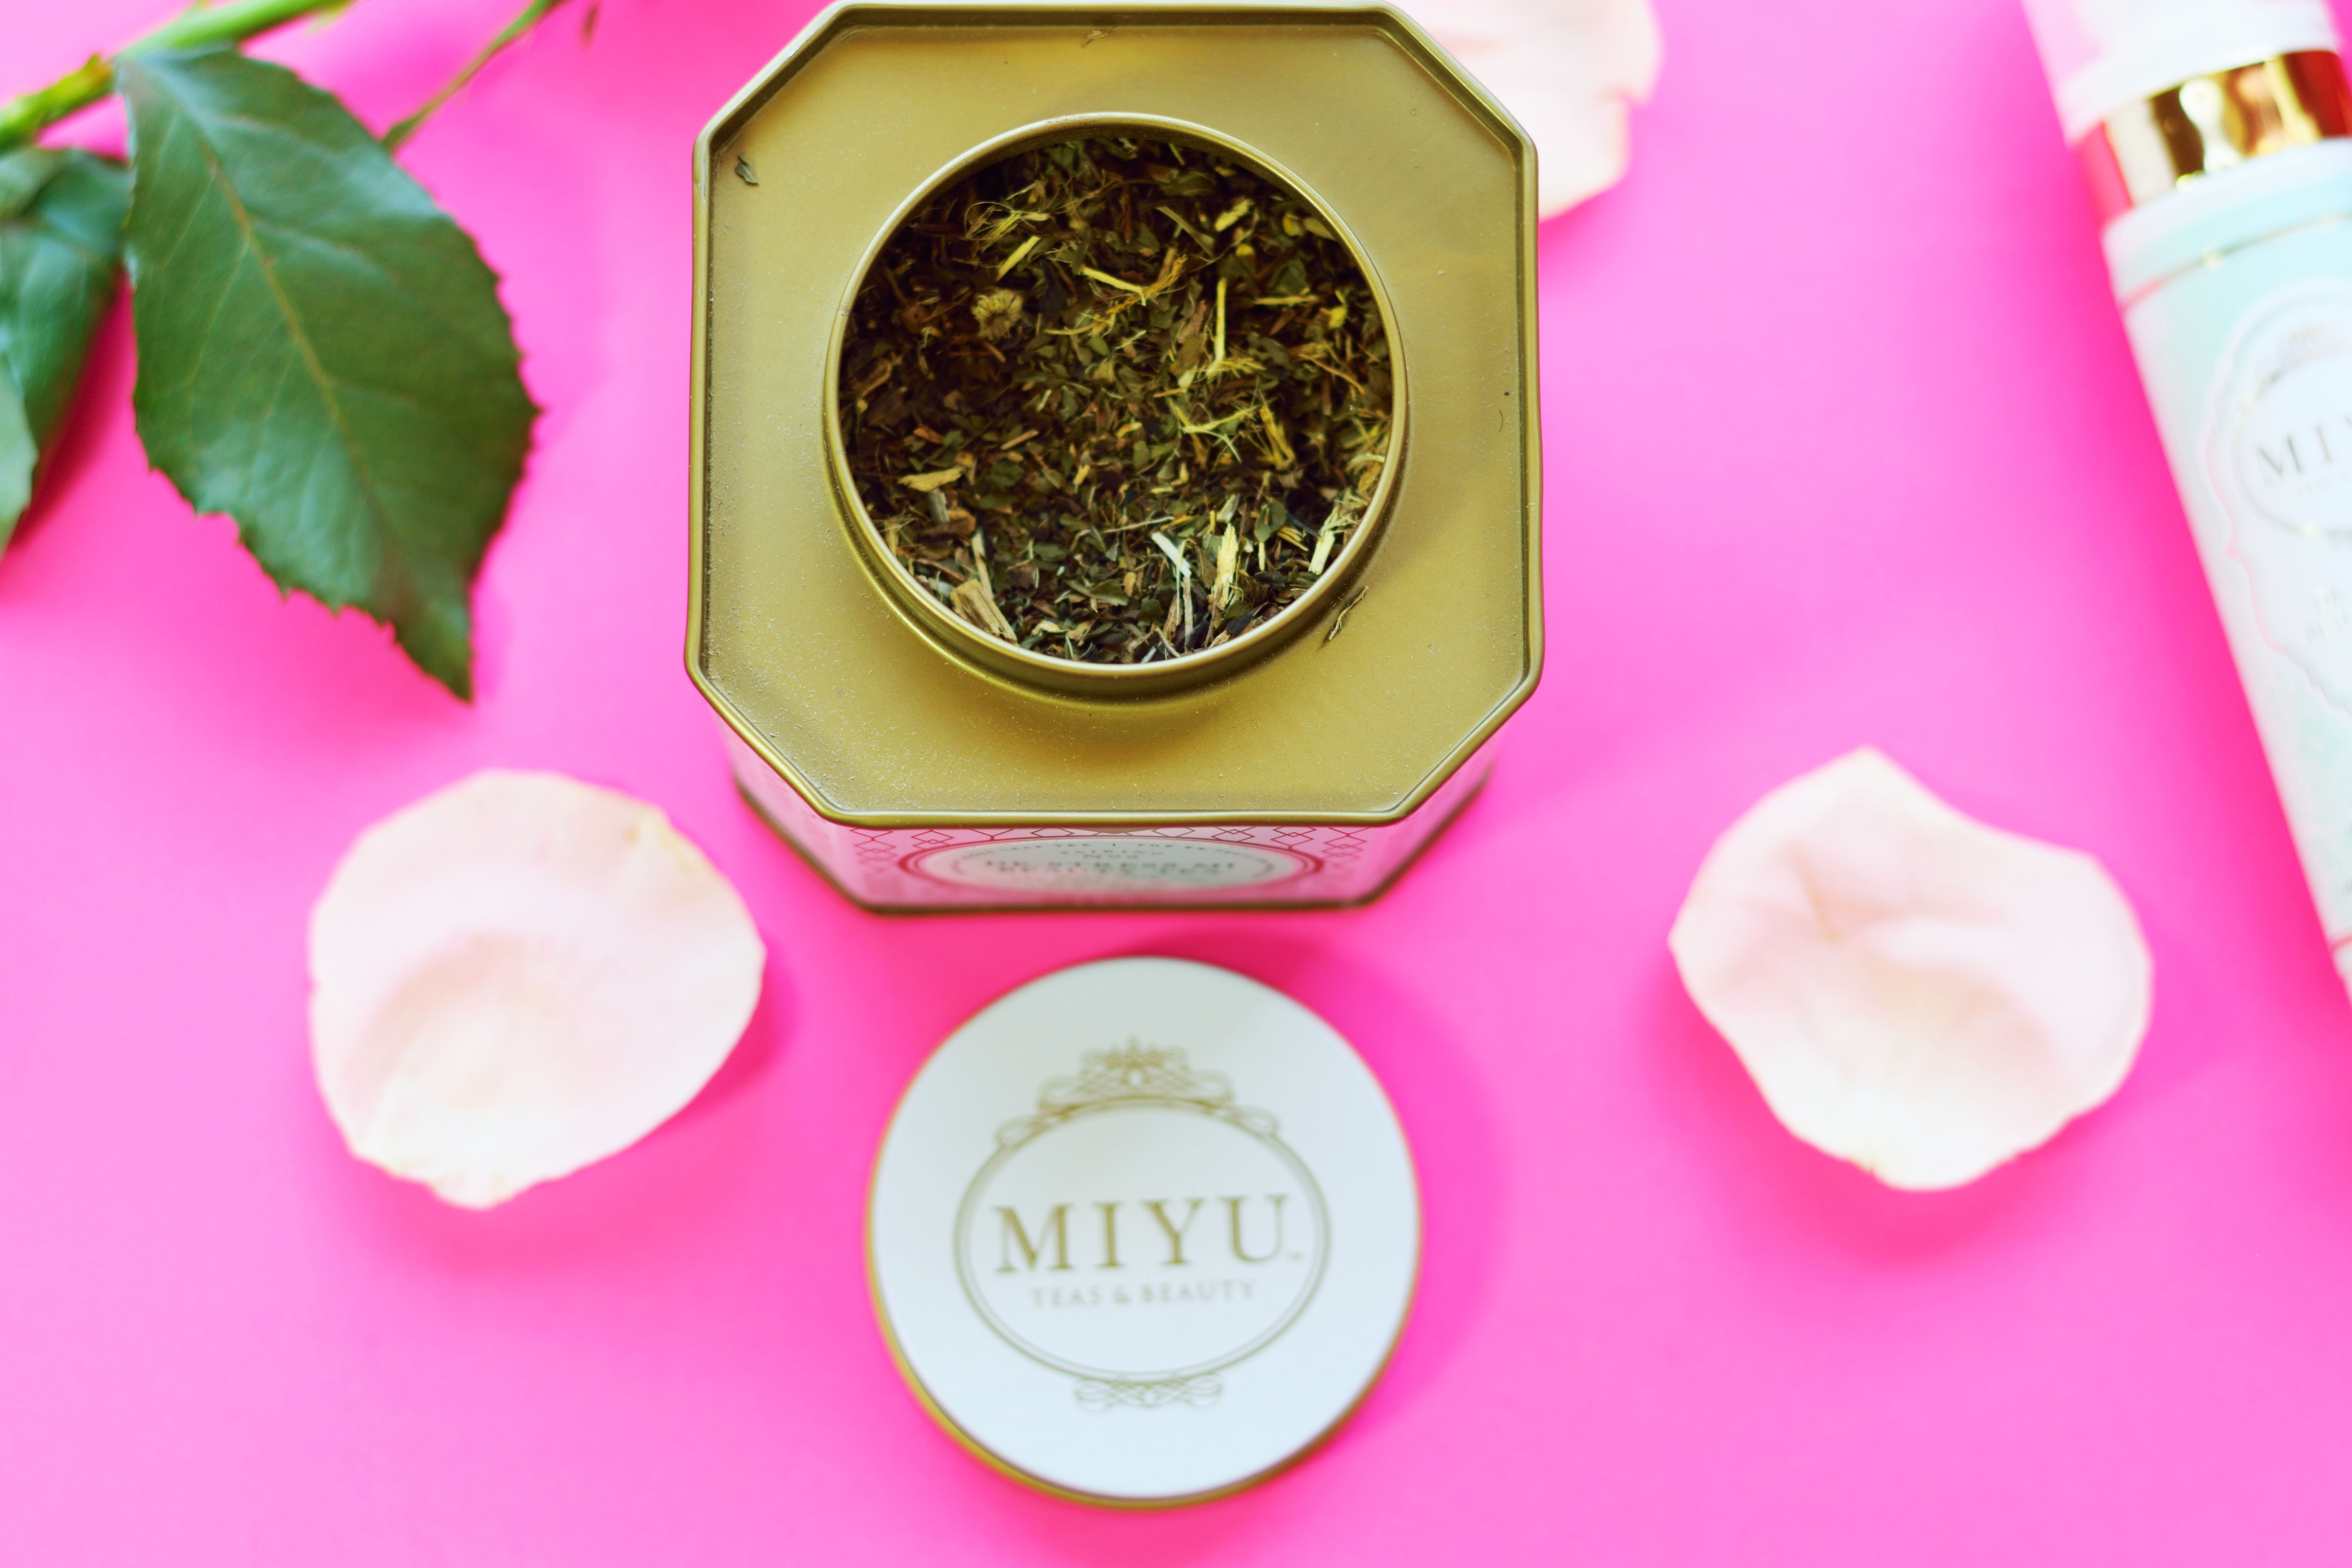 Beauty Regimen with skincare and tea from Miyu Beauty